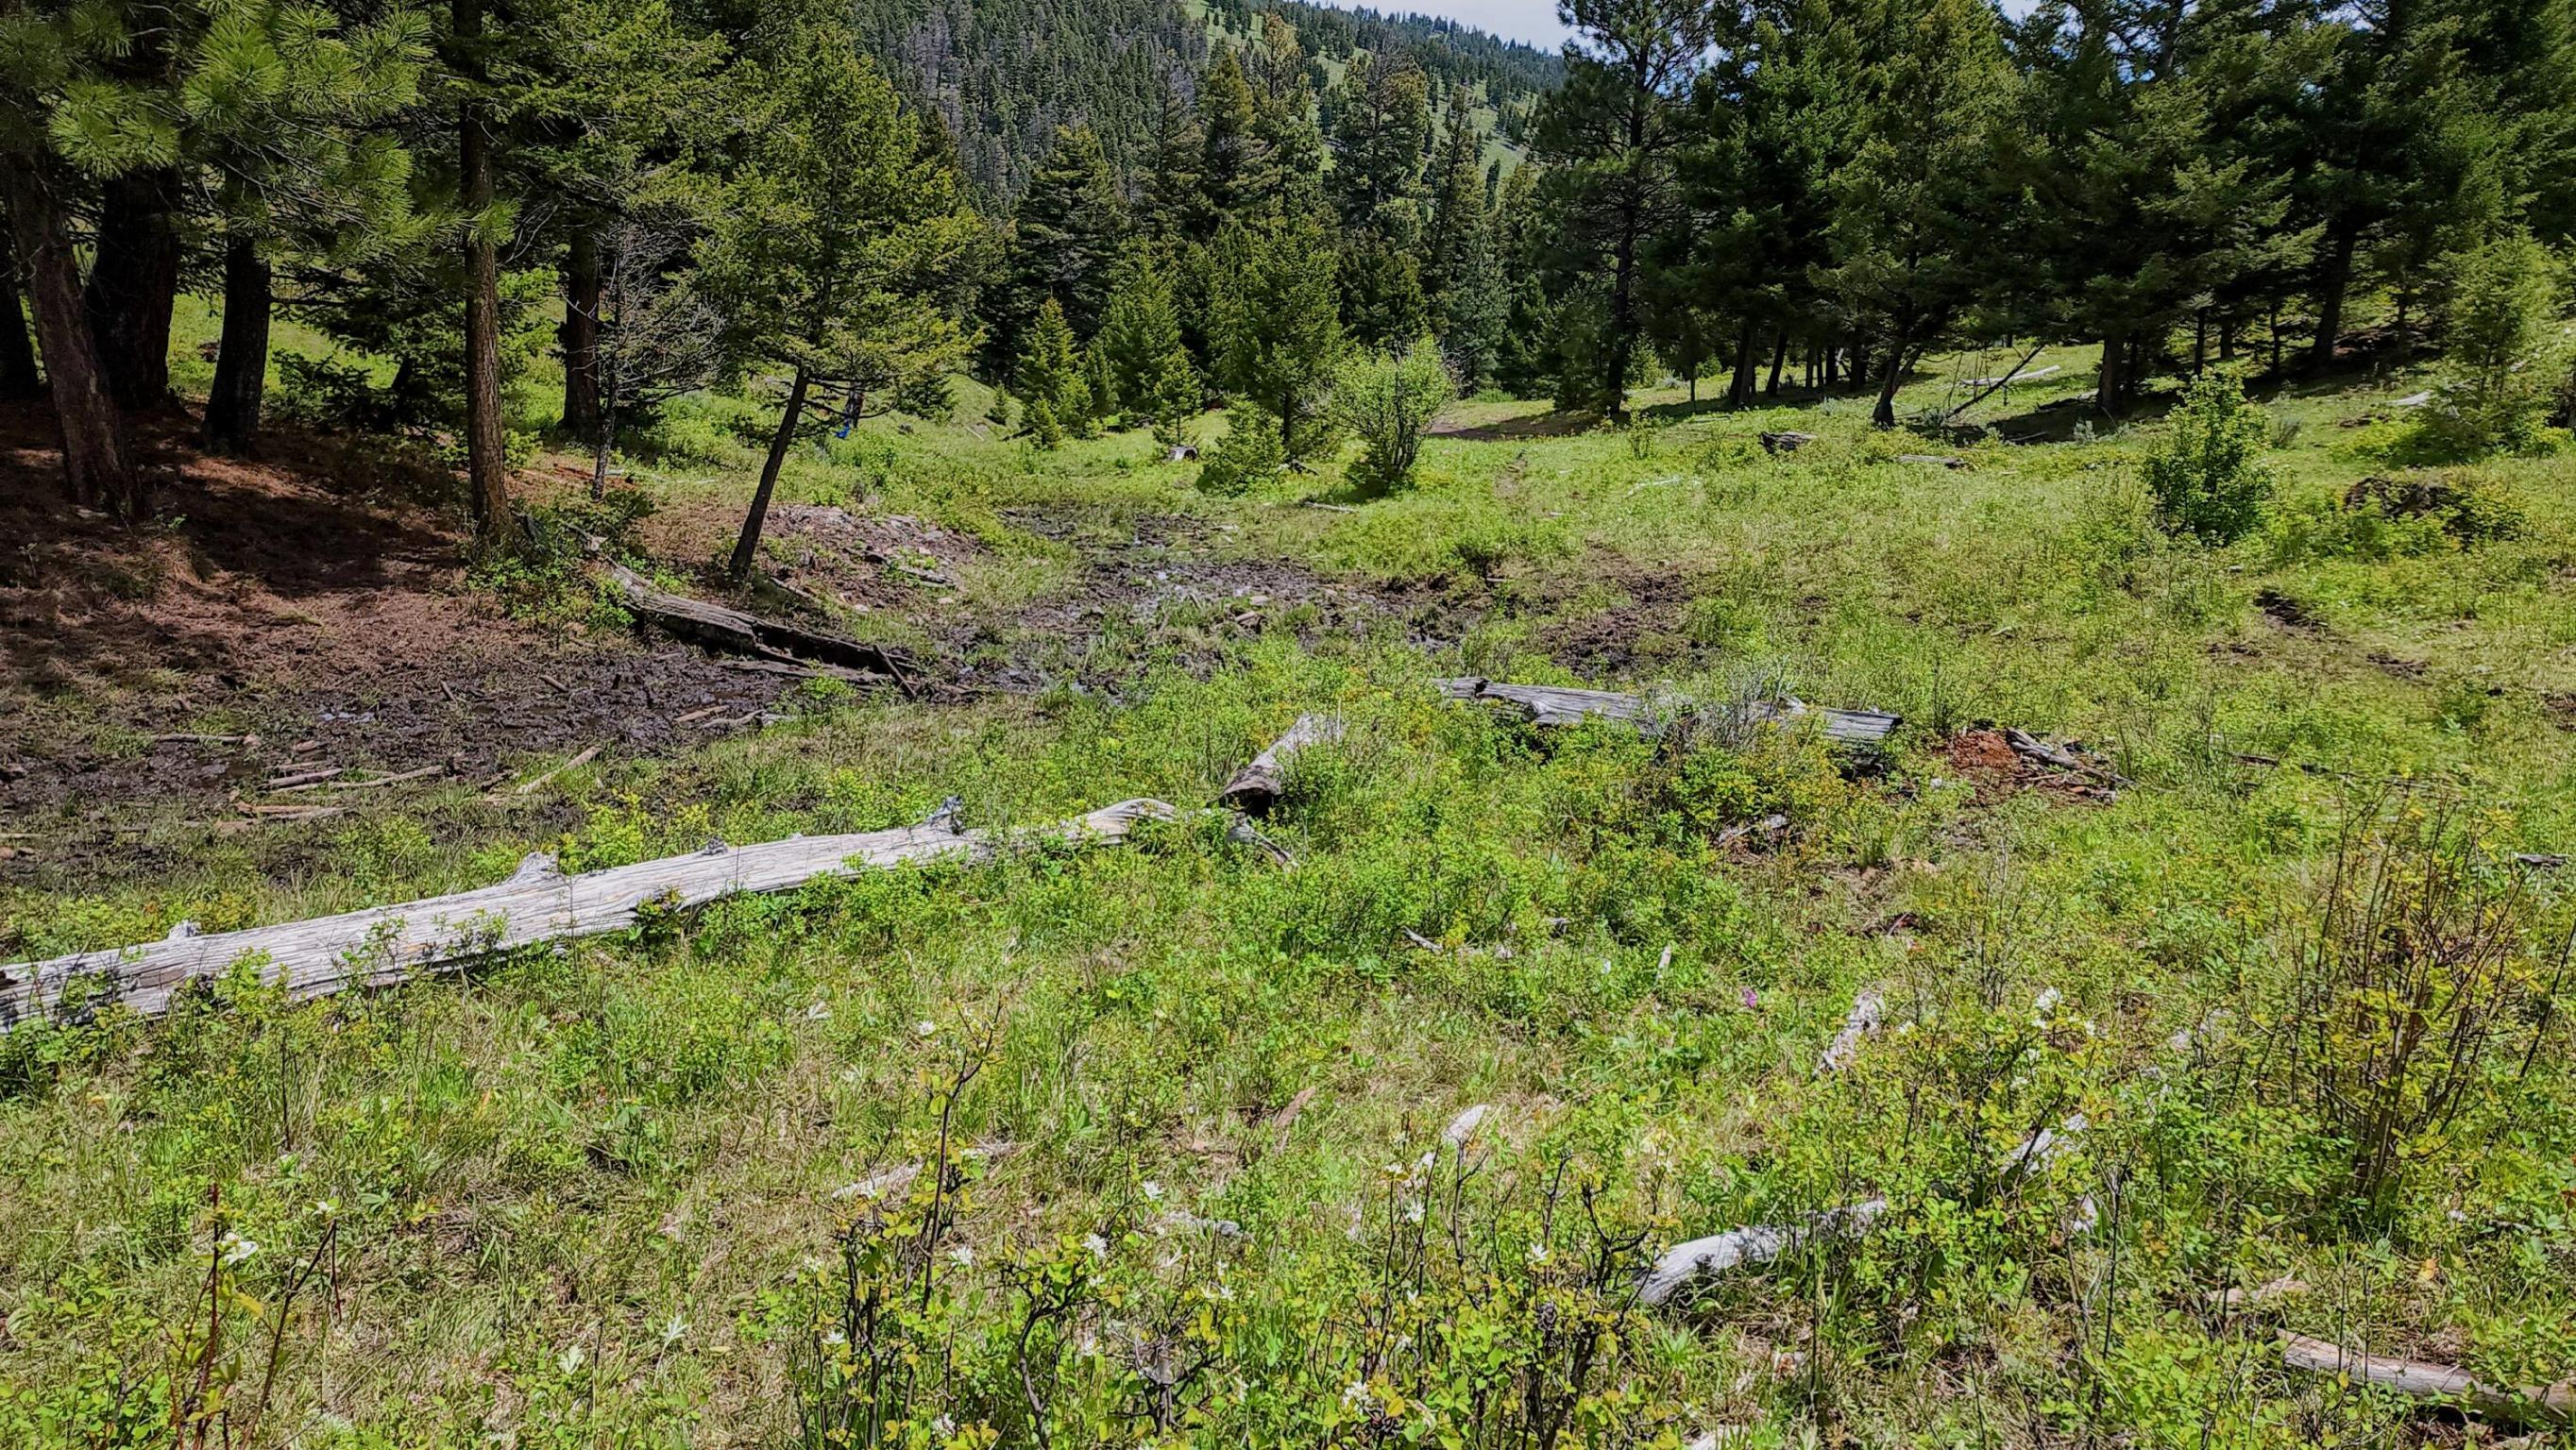 Seasonal Springs, Views for Miles, Horses welcome, Boarders Forest Service and Nature Conservancy. Newly built road right to property.   Call Dan Senecal at 406-439-5414, Cortney Senecal at 406-439-7557 or your real estate professional.